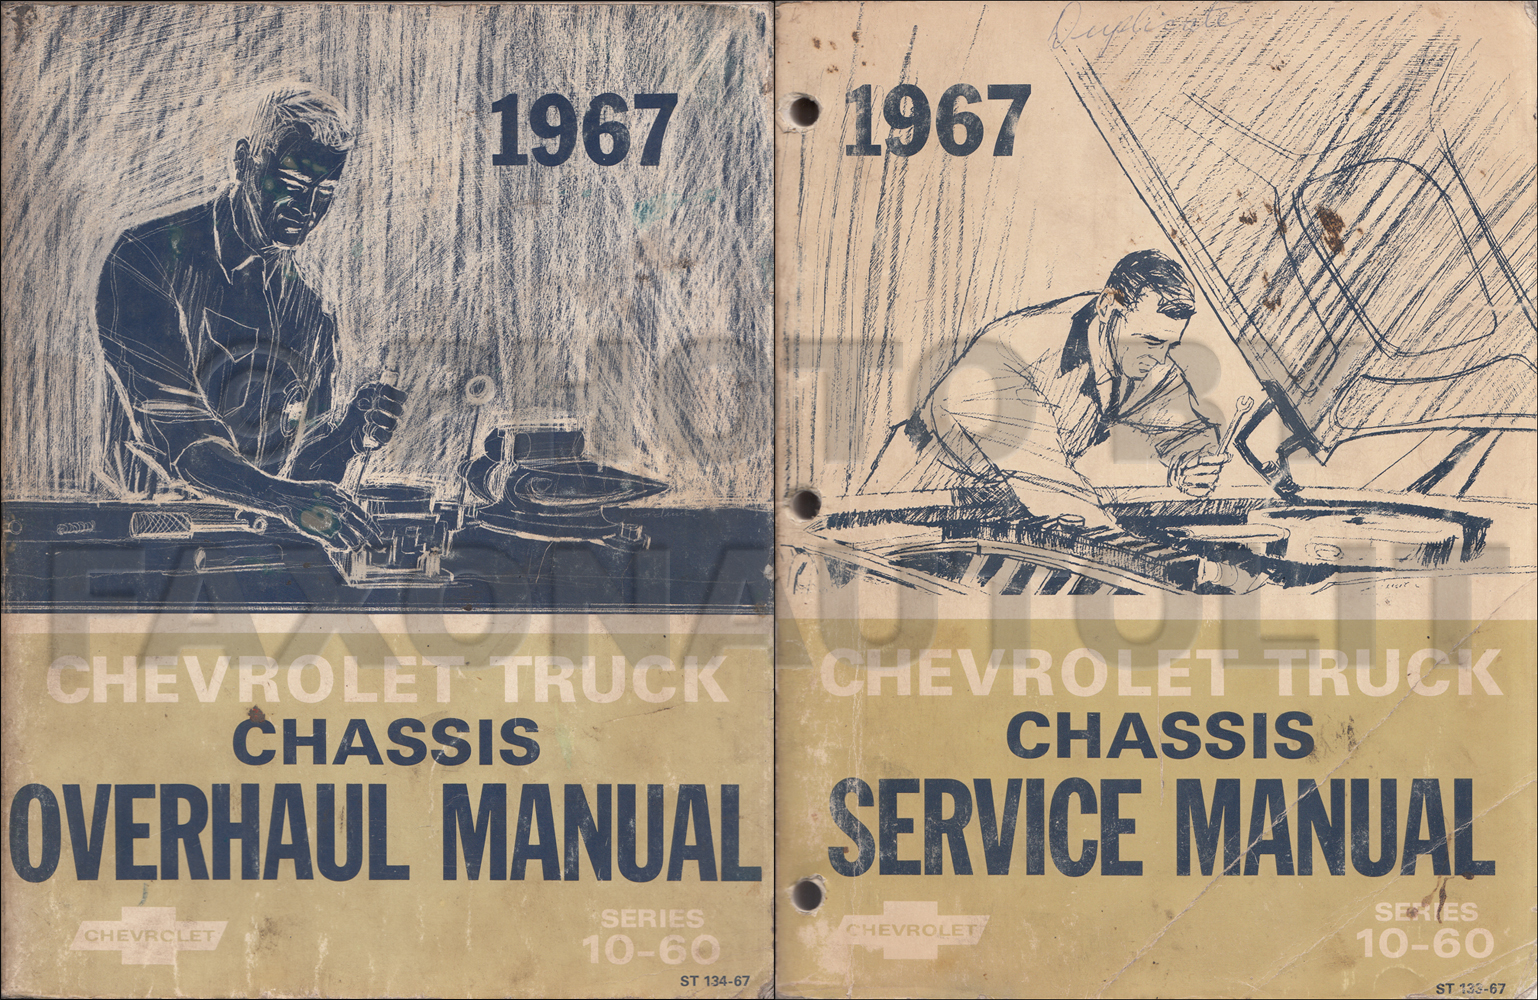 1967 Chevy Truck Owner's Manual